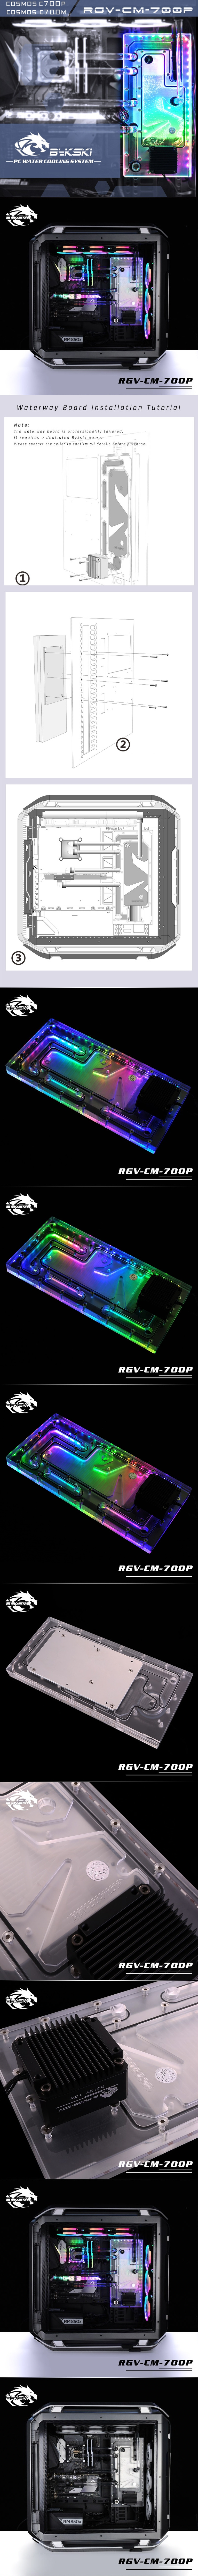 A large marketing image providing additional information about the product Bykski Cooler Master C700P RBW Water Distribution Board - Additional alt info not provided